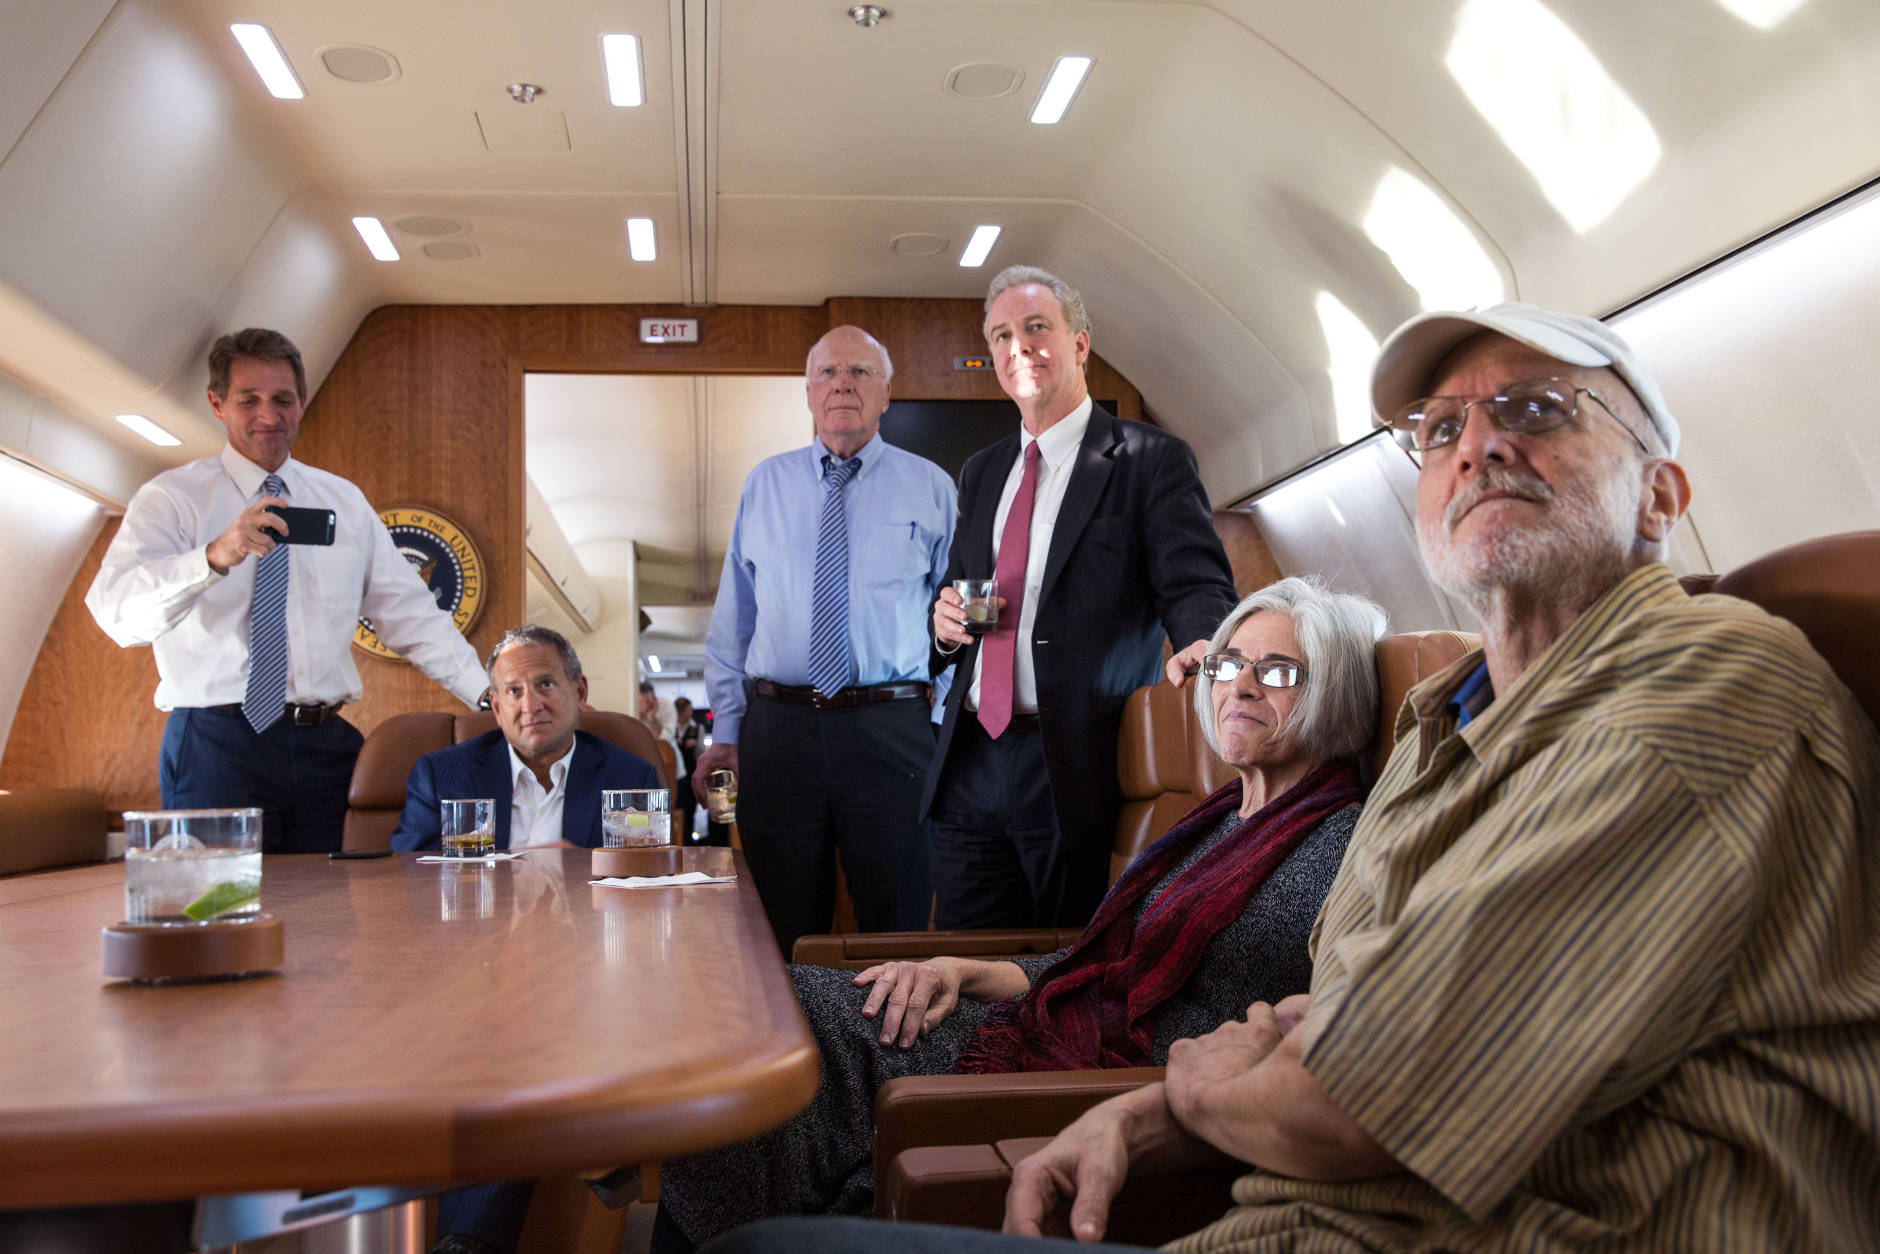 Alan Gross with his wife Judy, attorney Scott Gilbert, Rep. Chris Van Hollen, D-Md., Sen. Patrick Leahy, D-Vt., and Sen. Jeff Flake, R-Ariz. watch television onboard a government plane headed back to the US as the news breaks of his release, Dec. 17, 2014. (Official White House Photo by Lawrence Jackson)

This official White House photograph is being made available only for publication by news organizations and/or for personal use printing by the subject(s) of the photograph. The photograph may not be manipulated in any way and may not be used in commercial or political materials, advertisements, emails, products, promotions that in any way suggests approval or endorsement of the President, the First Family, or the White House.